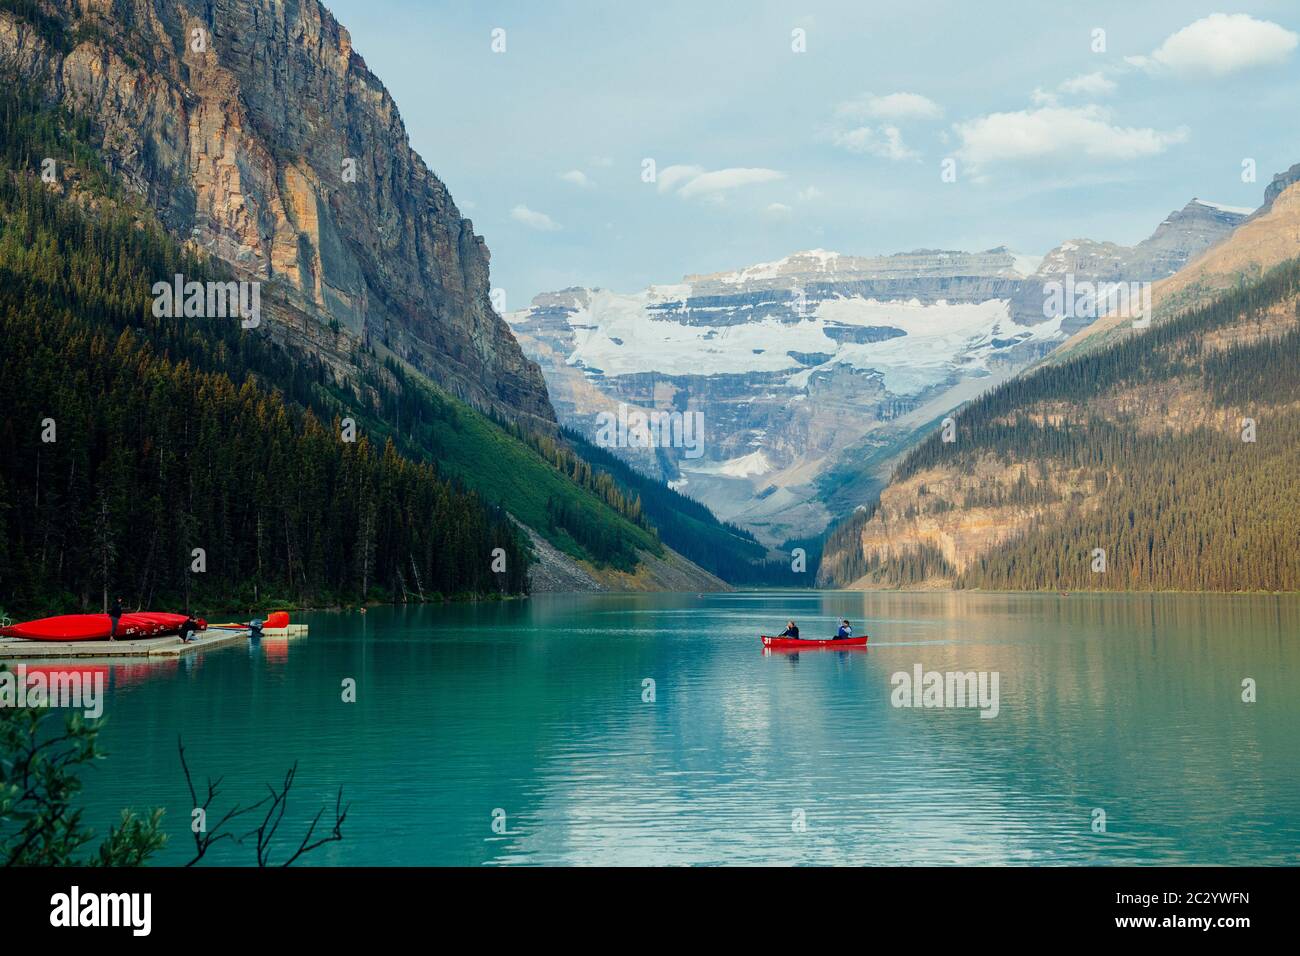 Side view of red rowboat on calm lake, Banff, Alberta, Canada Stock Photo